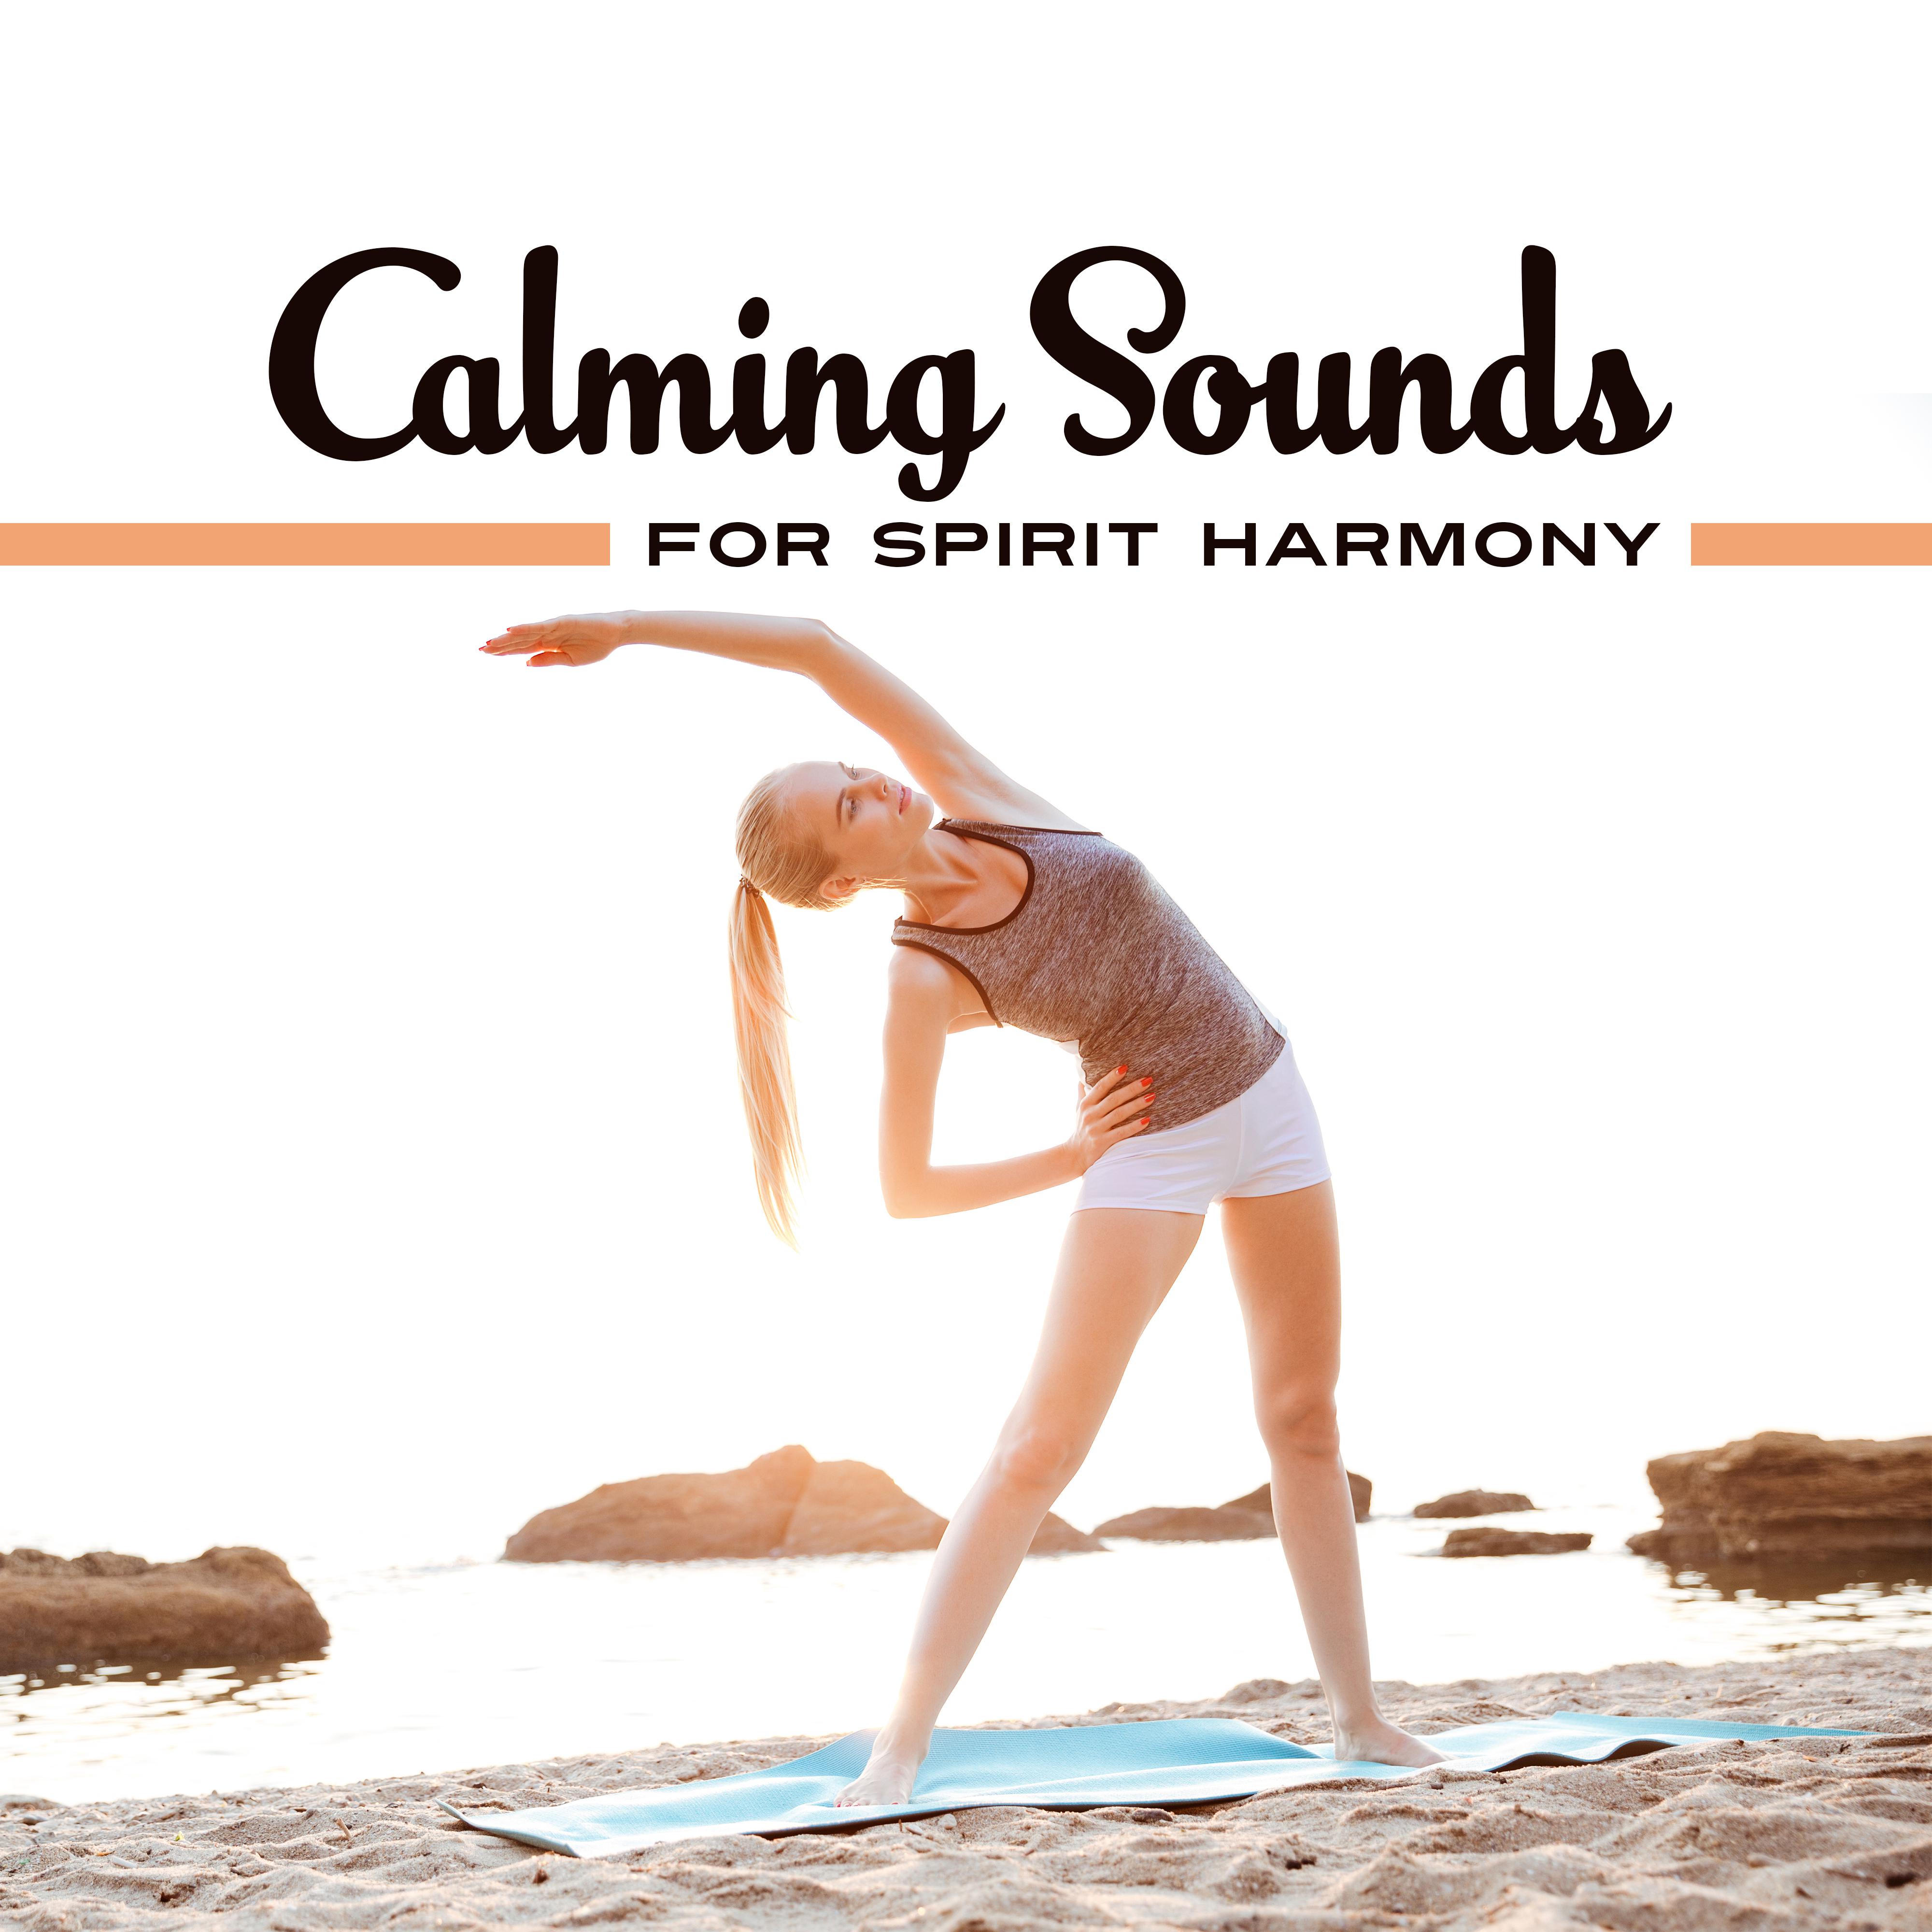 Calming Sounds for Spirit Harmony – Easy Listening, Stress Relief, Meditation Sounds, Peaceful Spirit Journey